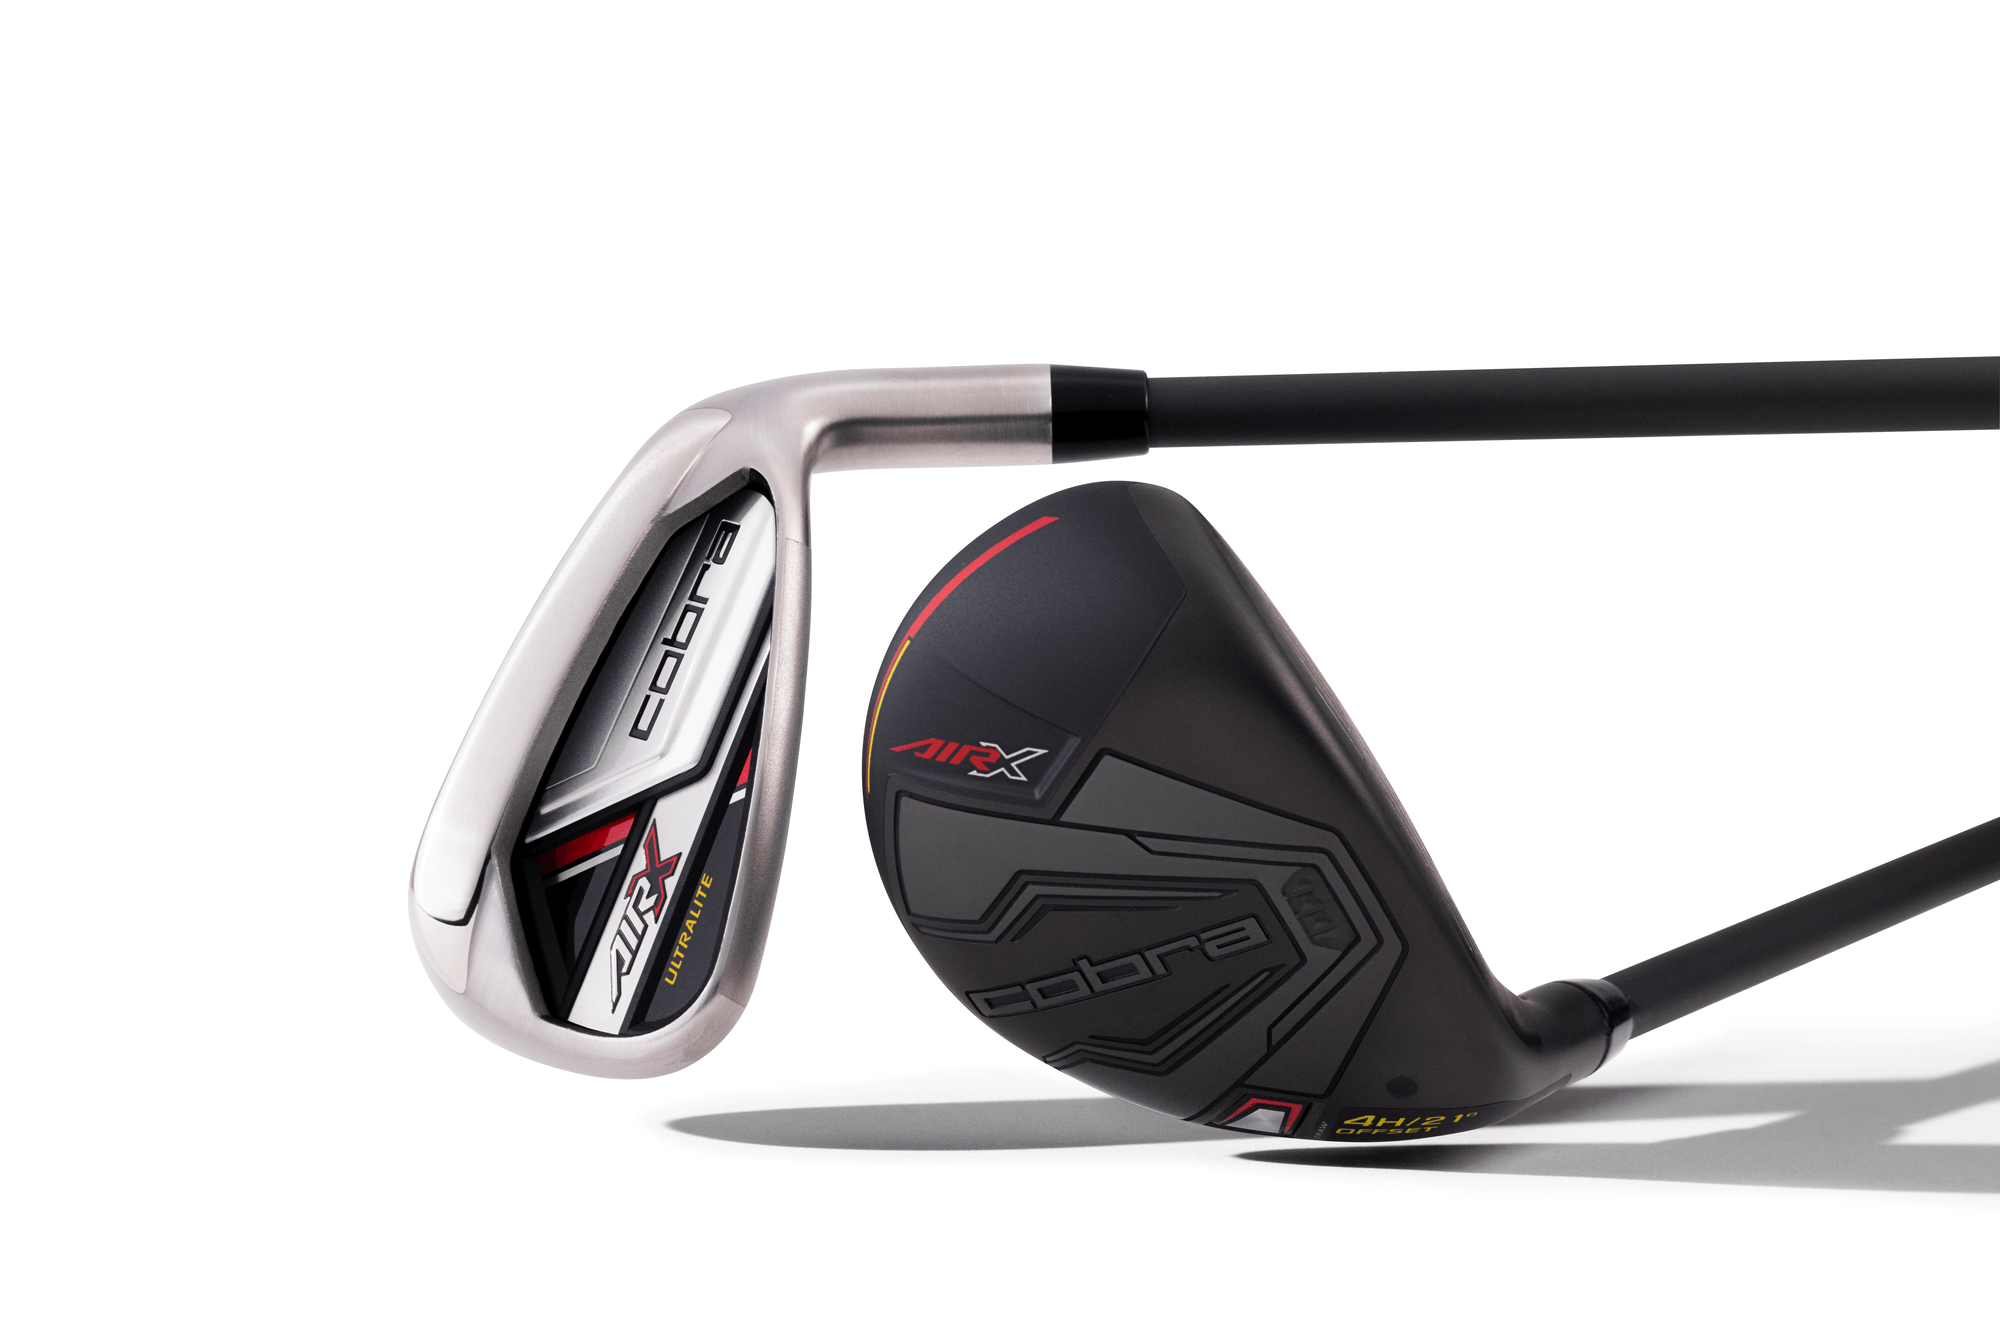 Cobra Golf Launches New Ultra-Long and Forgiving AIR-X Irons and Hybrids